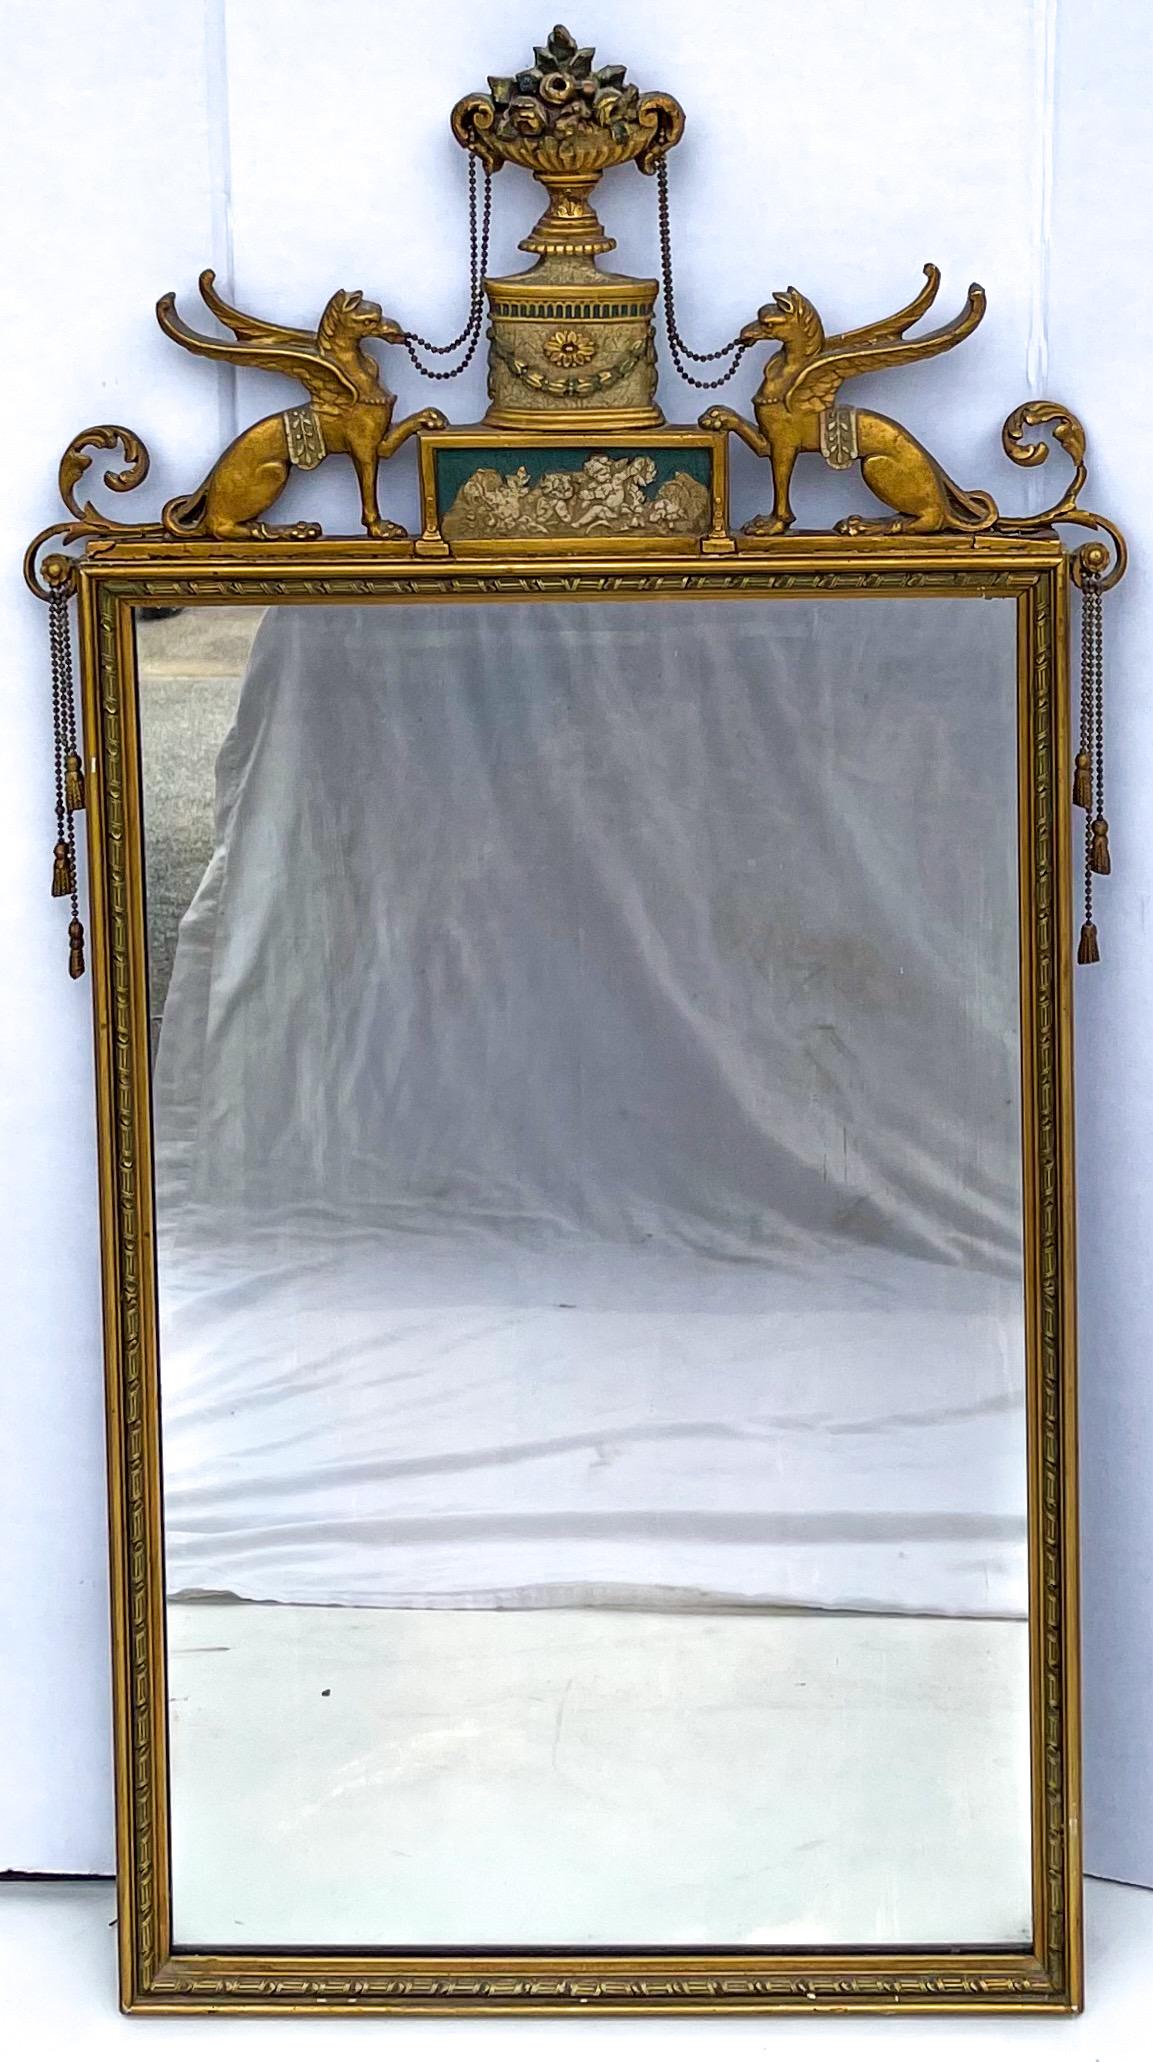 This is an early 20th century Italian mirror with floral pediment, carved griffins and draping brass tassels. There is a cherubic plaque that shows wear, and there is some wear throughout the gilt. It is unmarked.